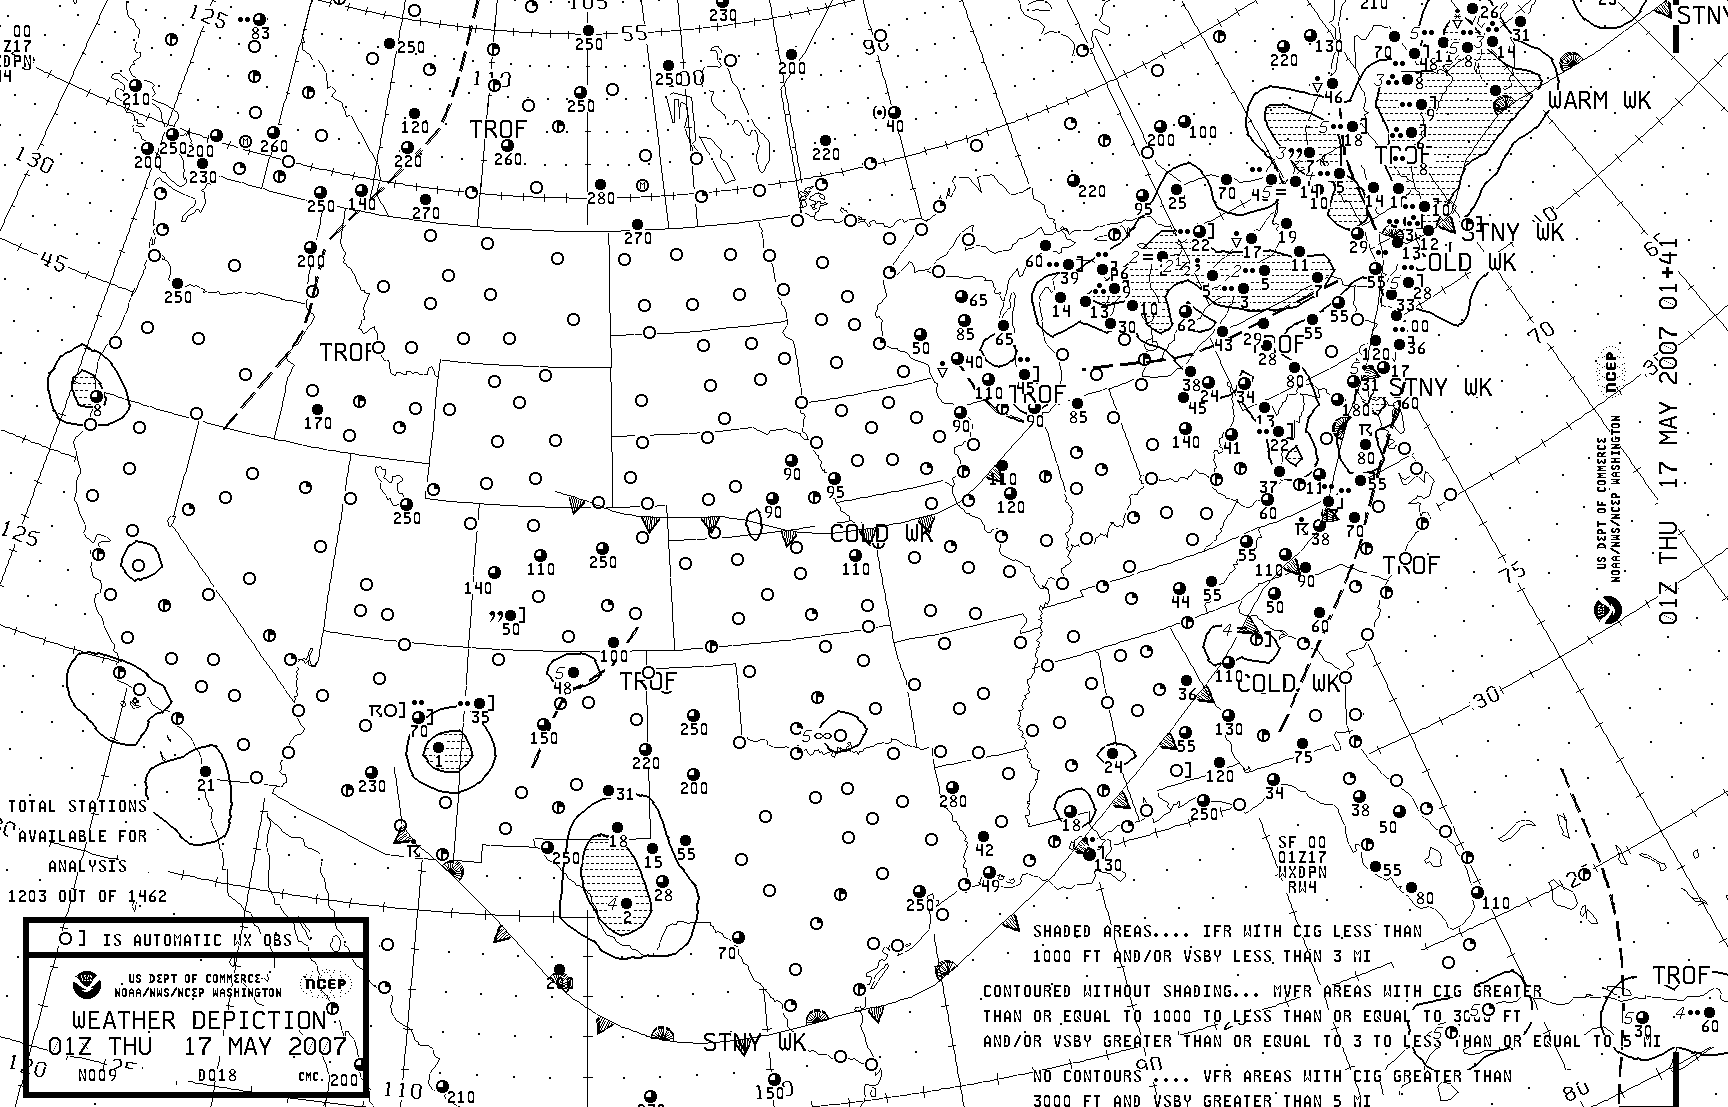 20070517 01h41 USA Weather Depiction.gif